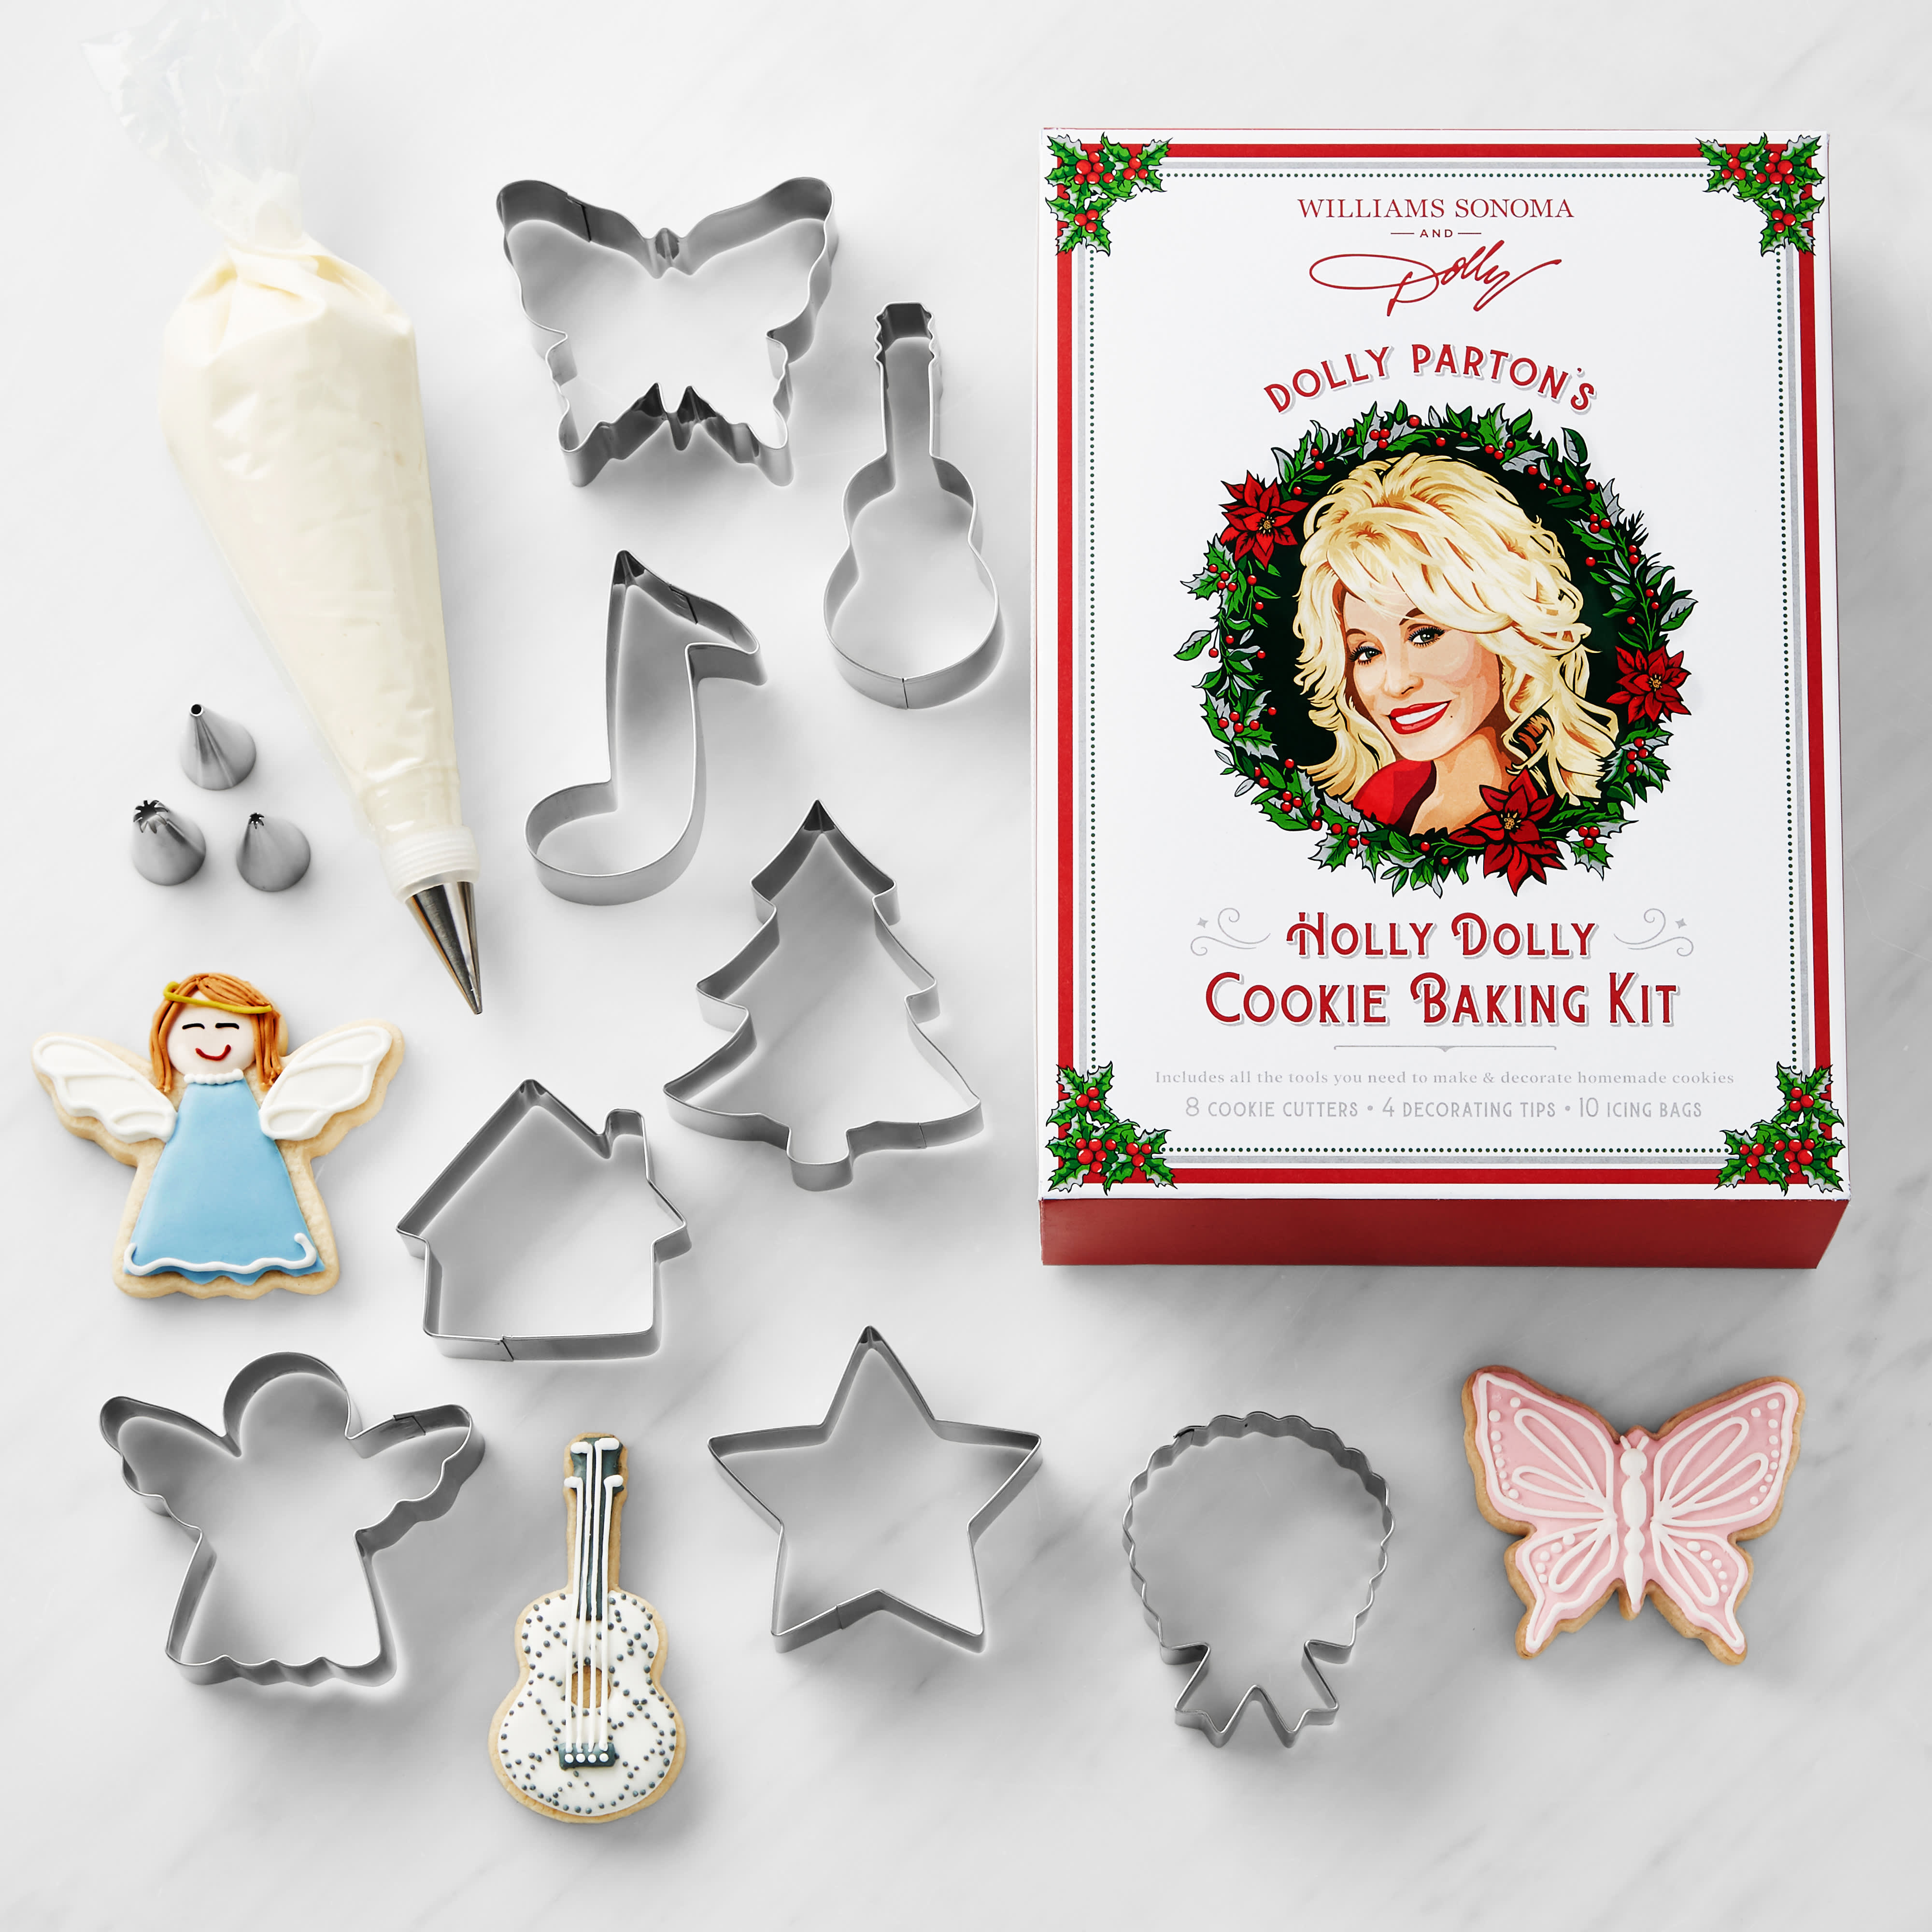 Dolly Parton Has a Holiday Collection with Williams-Sonoma